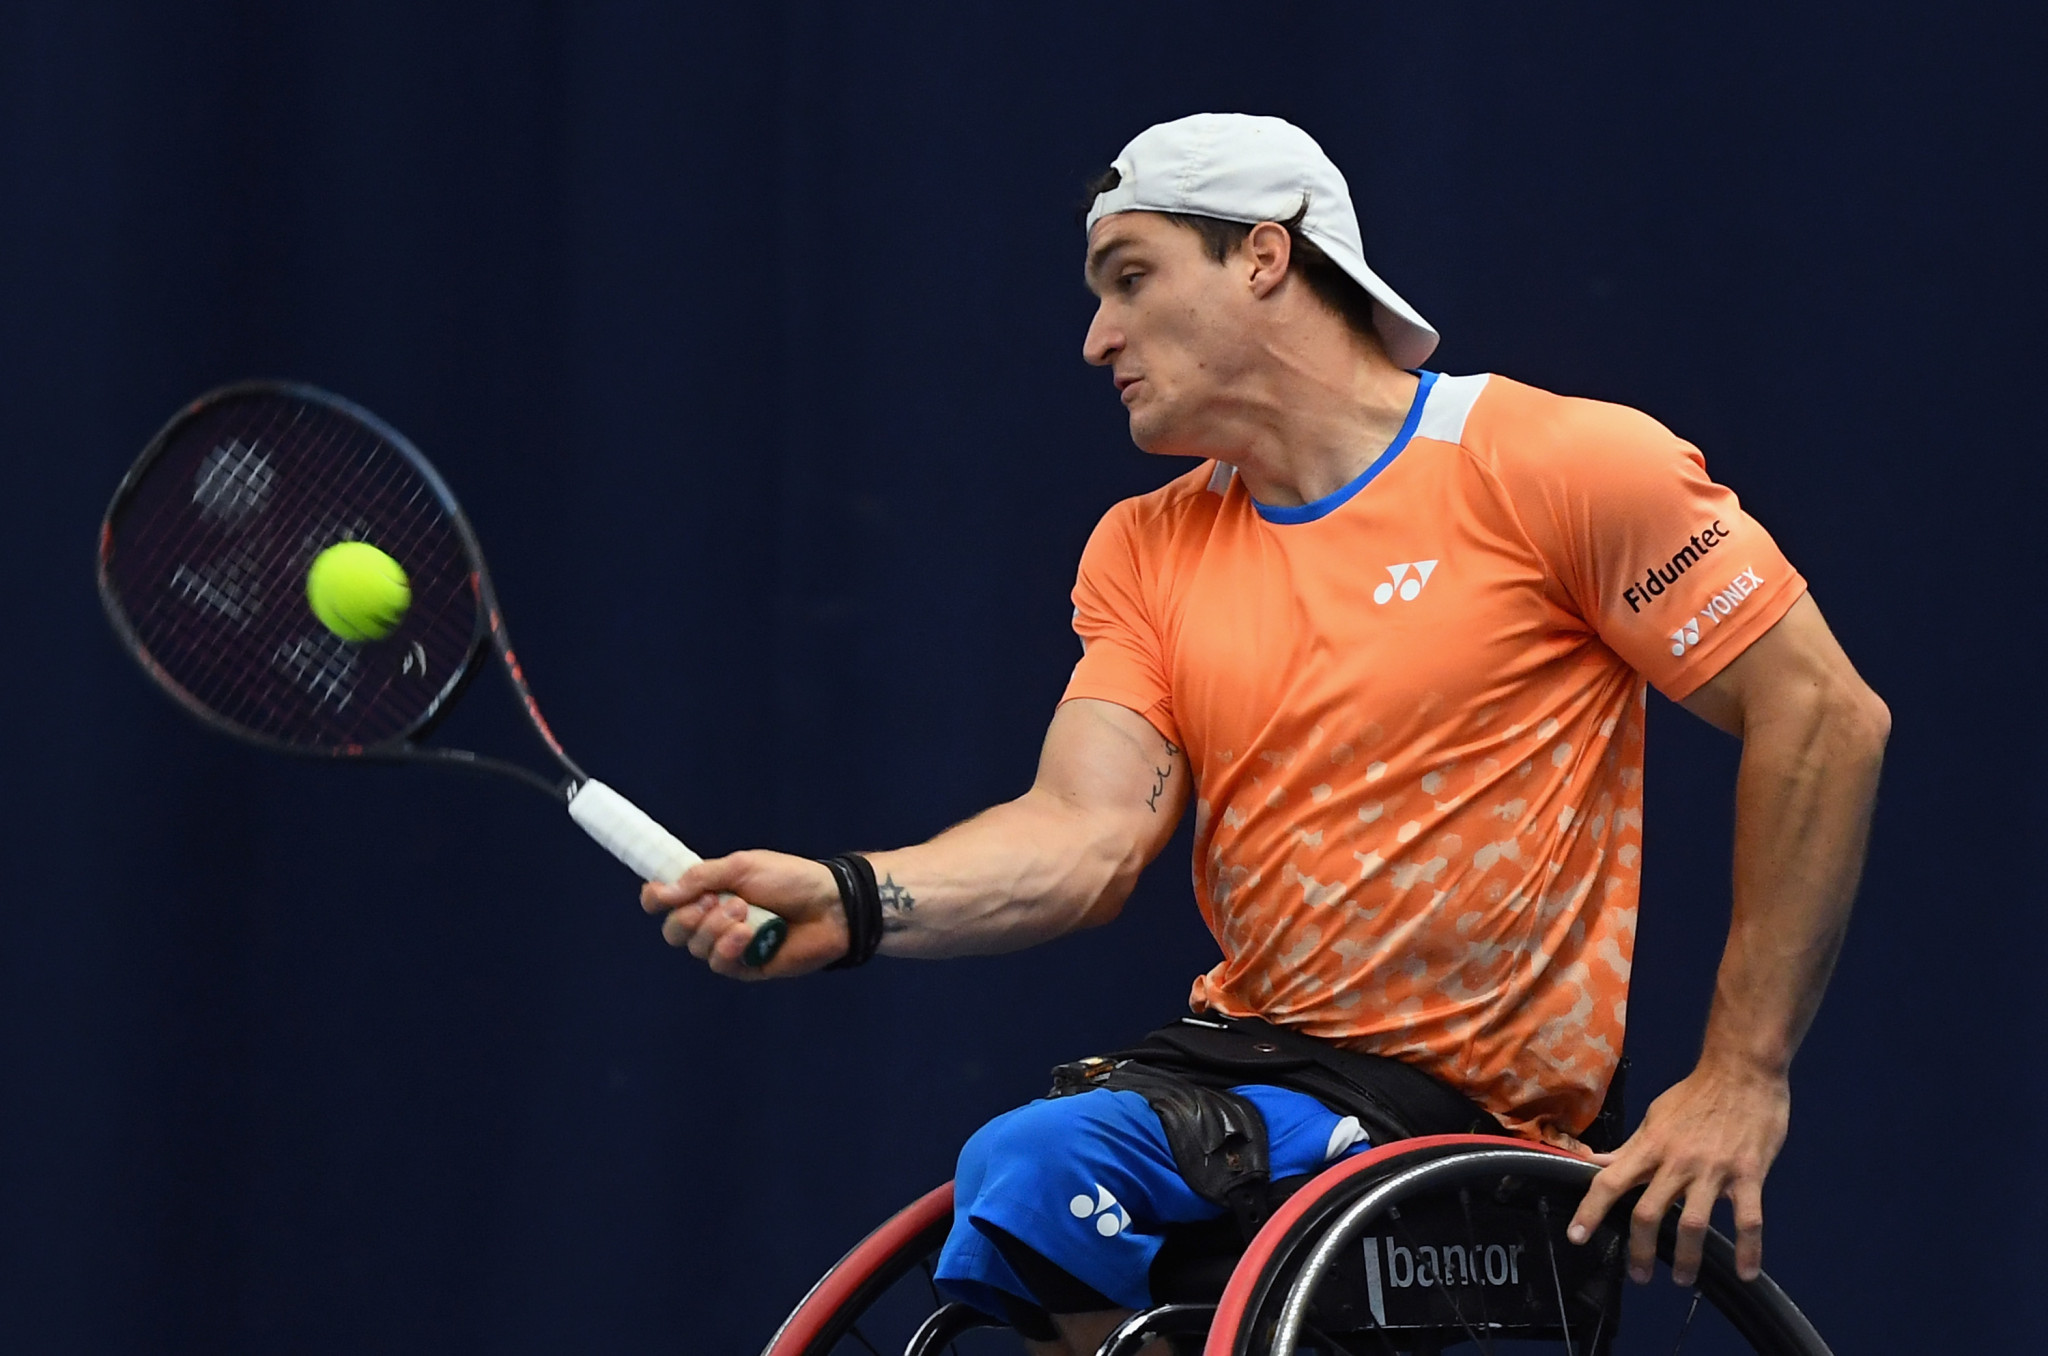 Fernandez secures second straight win at Wheelchair Tennis Masters in Orlando